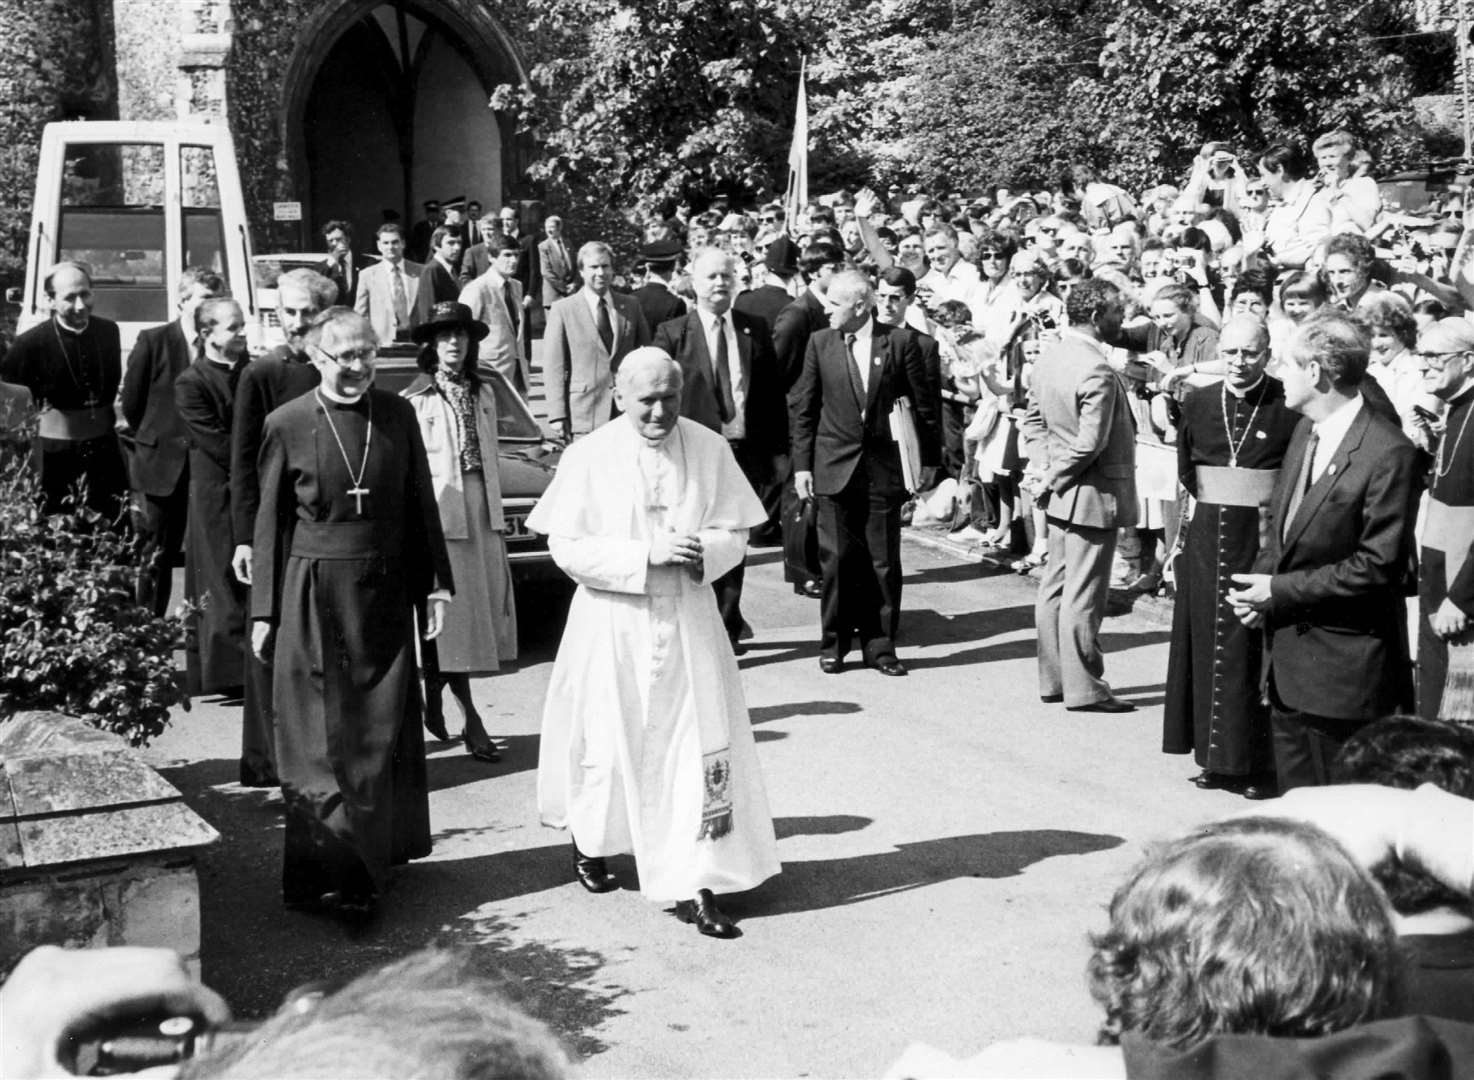 The Popes was met with 'thunderous applause' as he entered the Cathedral